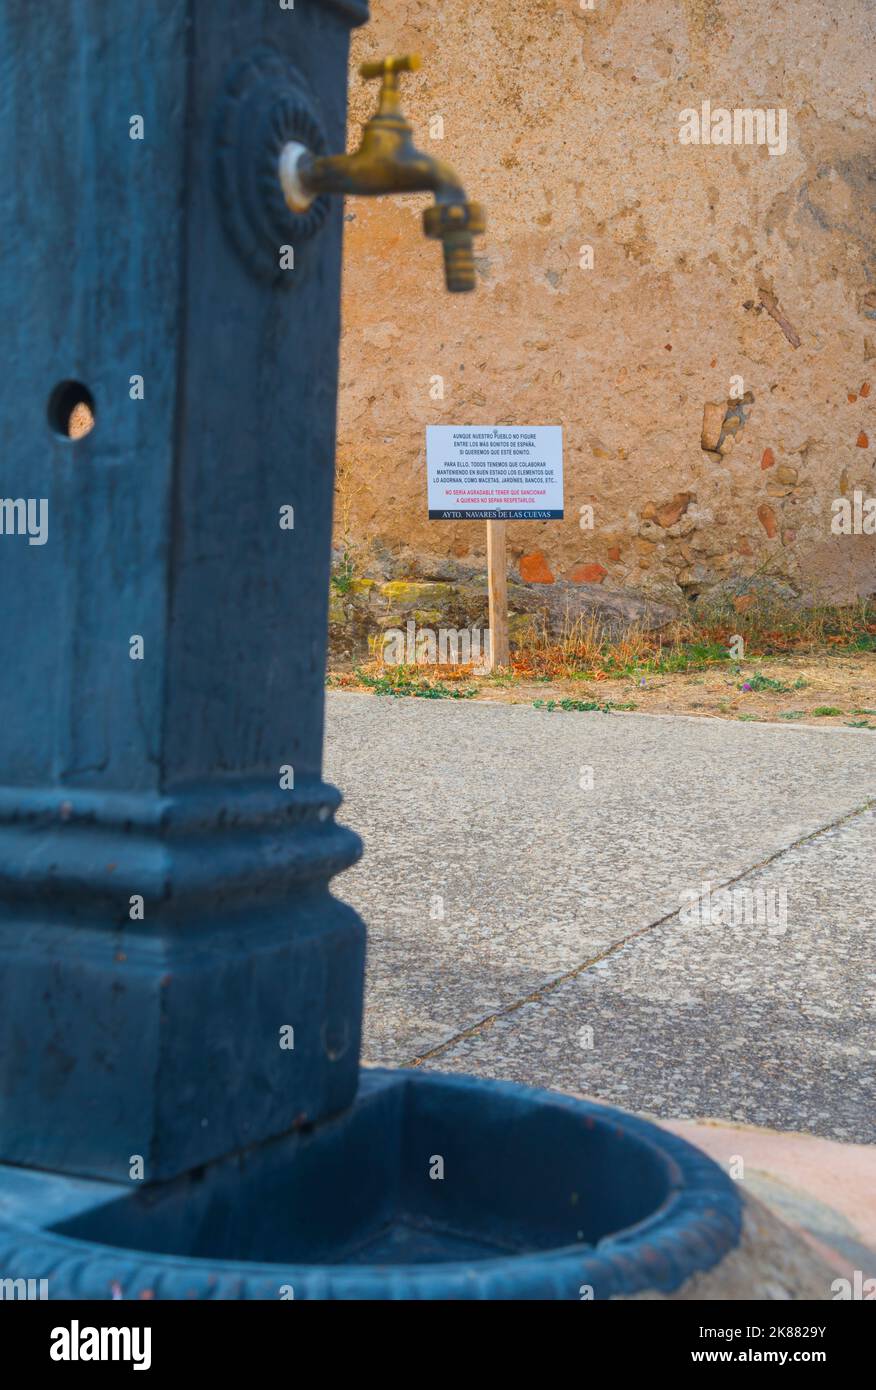 Ecological sign and fountain. Spain. Stock Photo